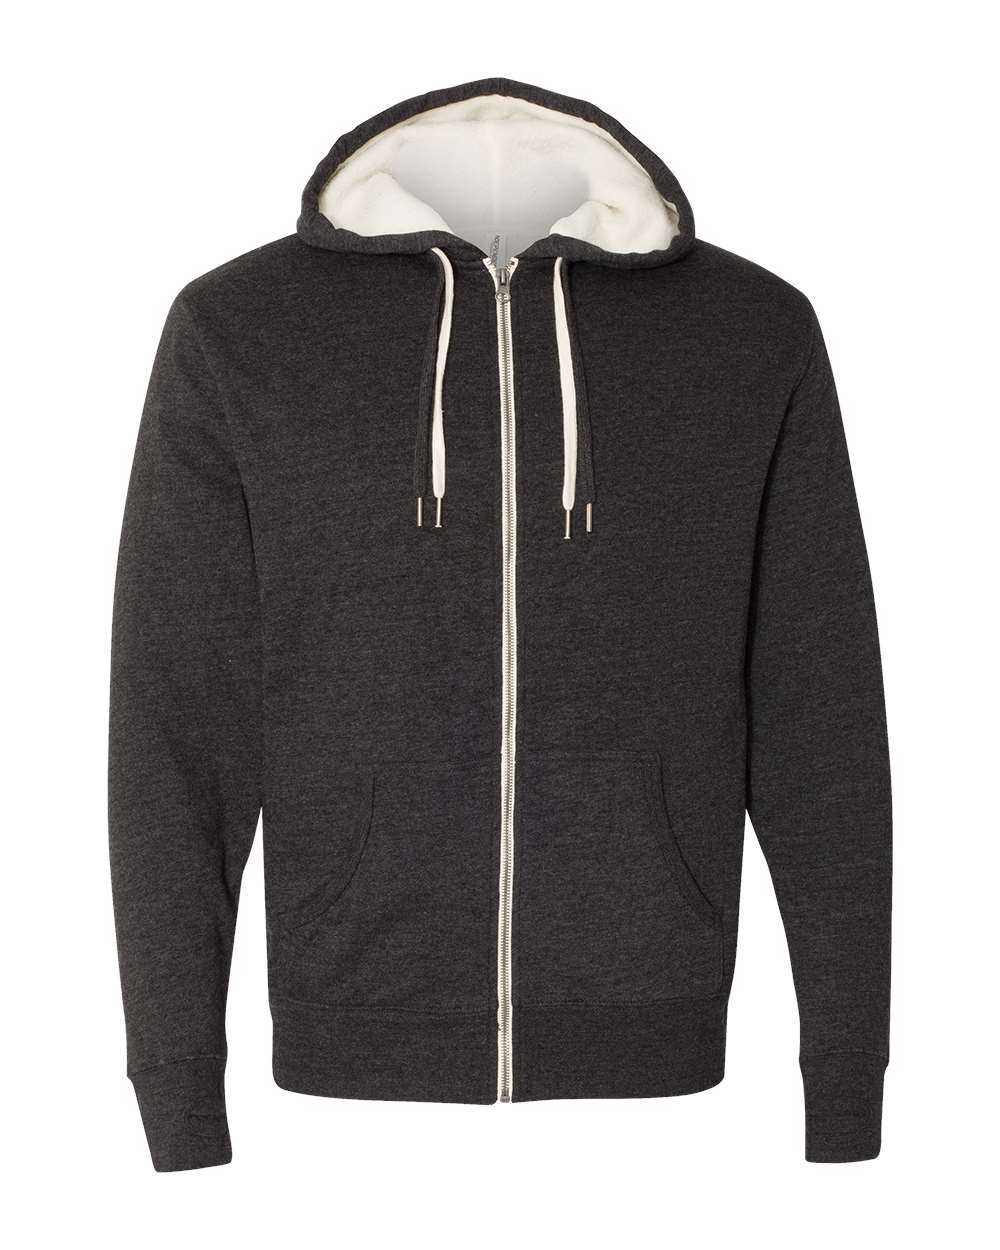 Unisex Sherpa-Lined Hooded Sweatshirt-Independent Trading Co.